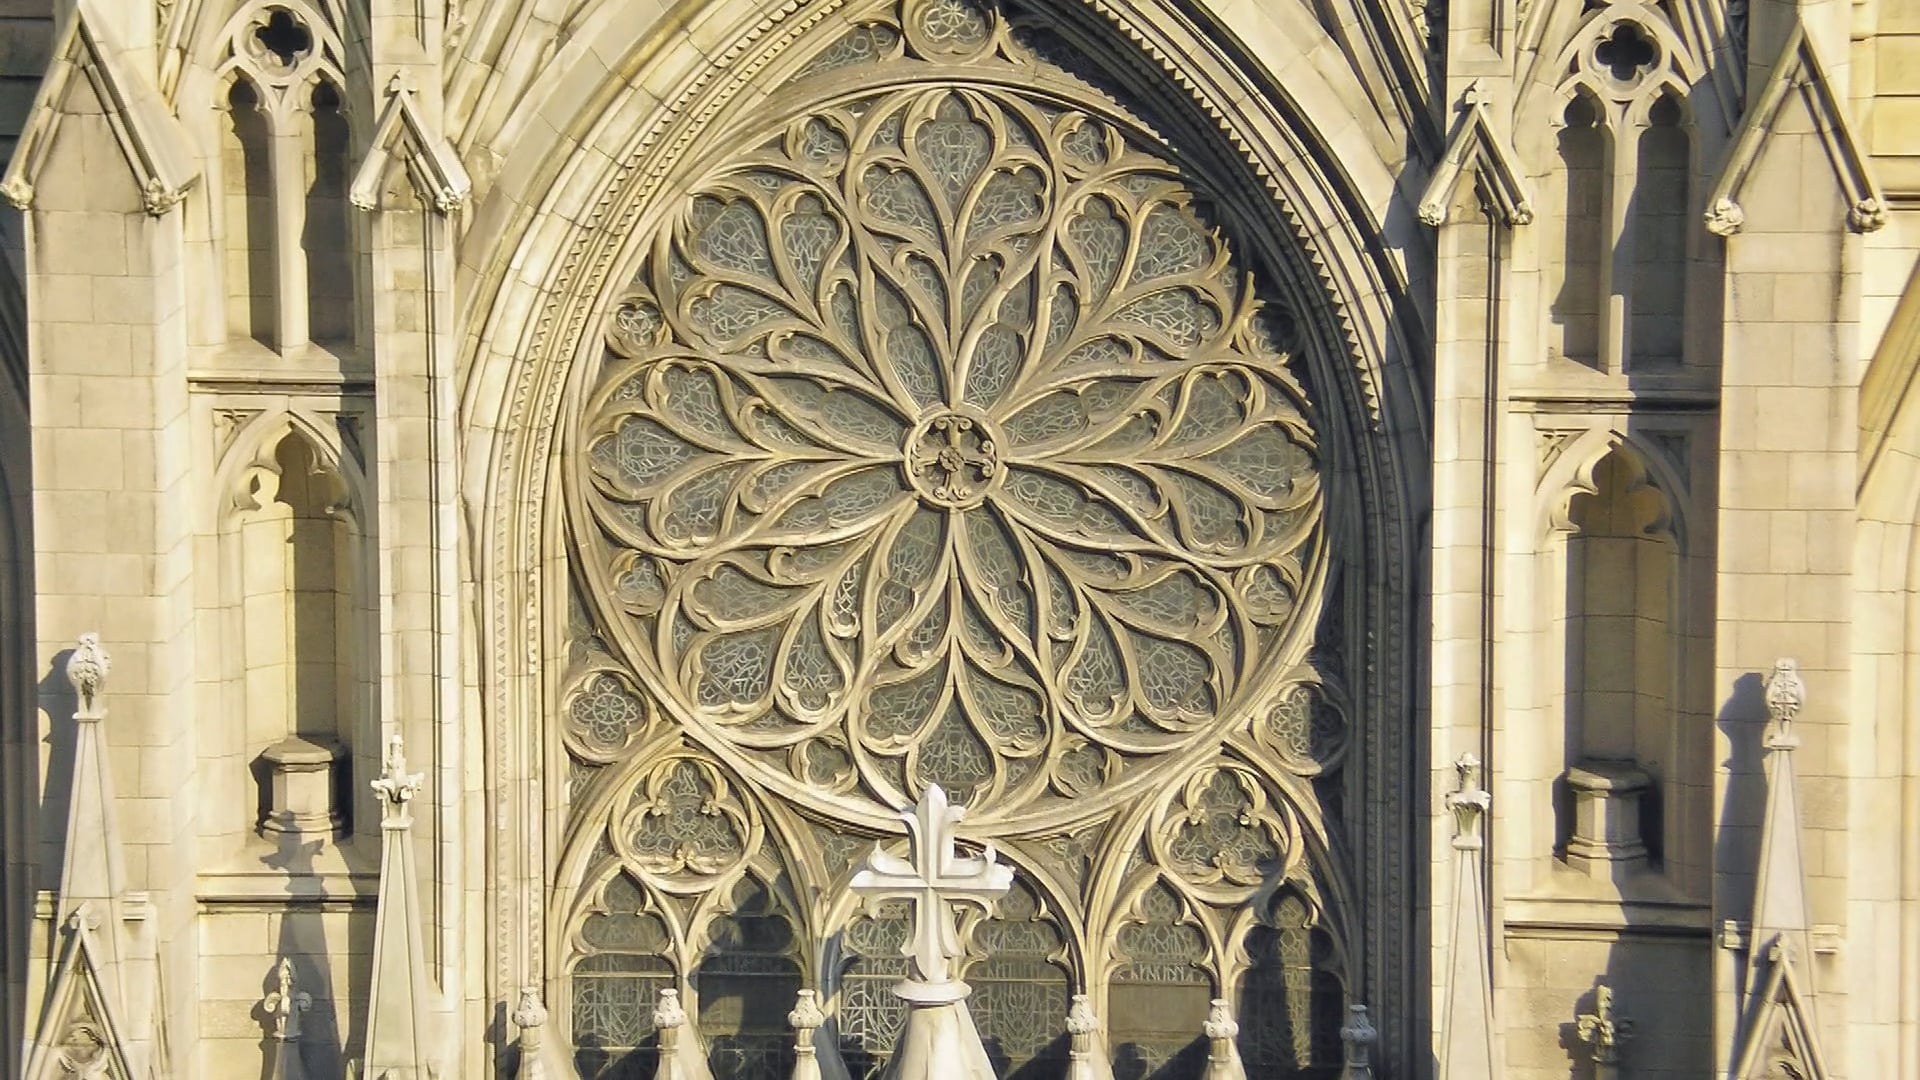 Mass from St. Patrick's Cathedral - May 12, 2022